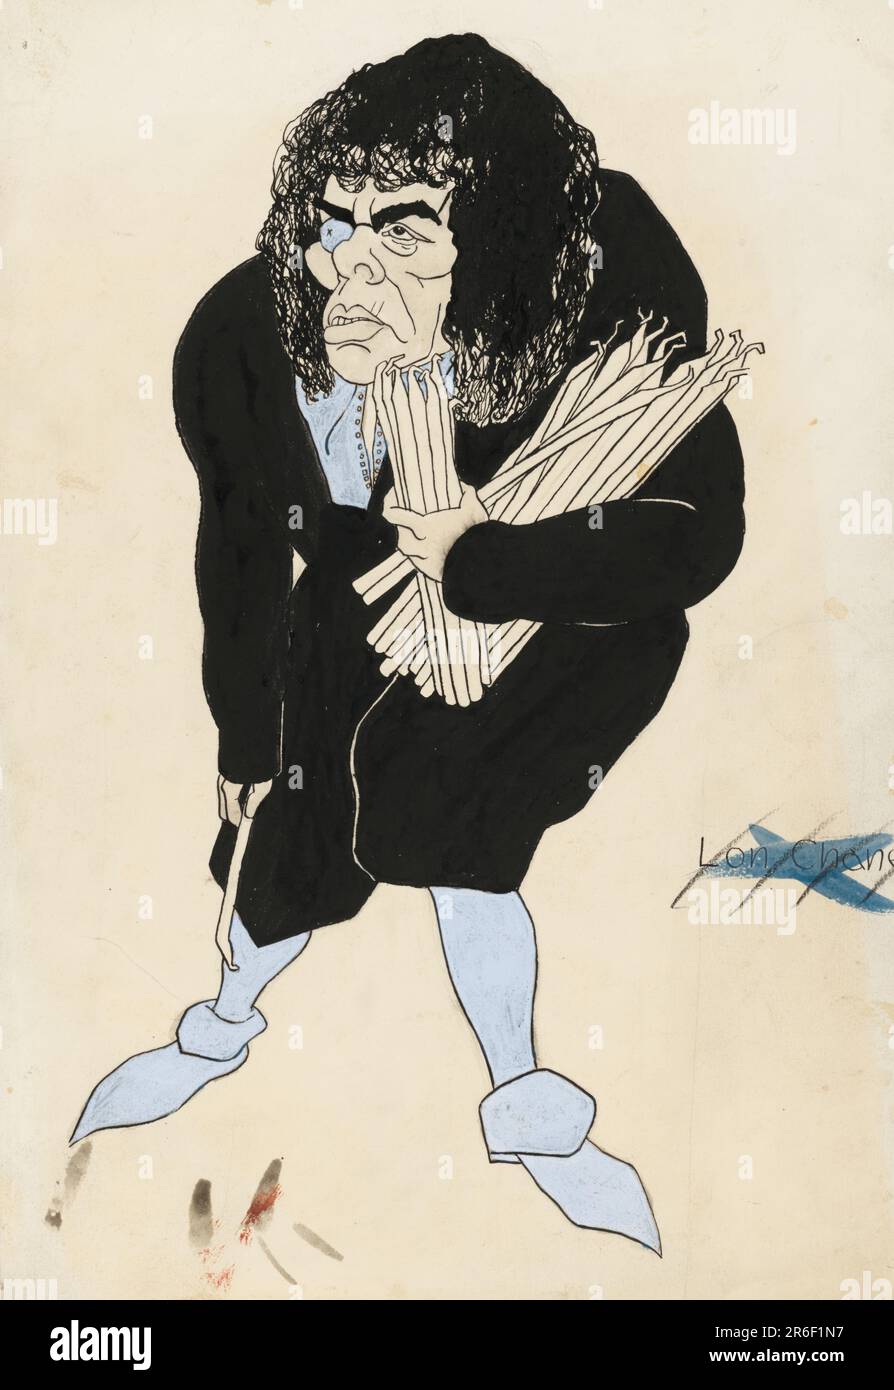 Lon Chaney. Date: 1923. India ink, pencil and gouache on paper. Museum: NATIONAL PORTRAIT GALLERY. Stock Photo